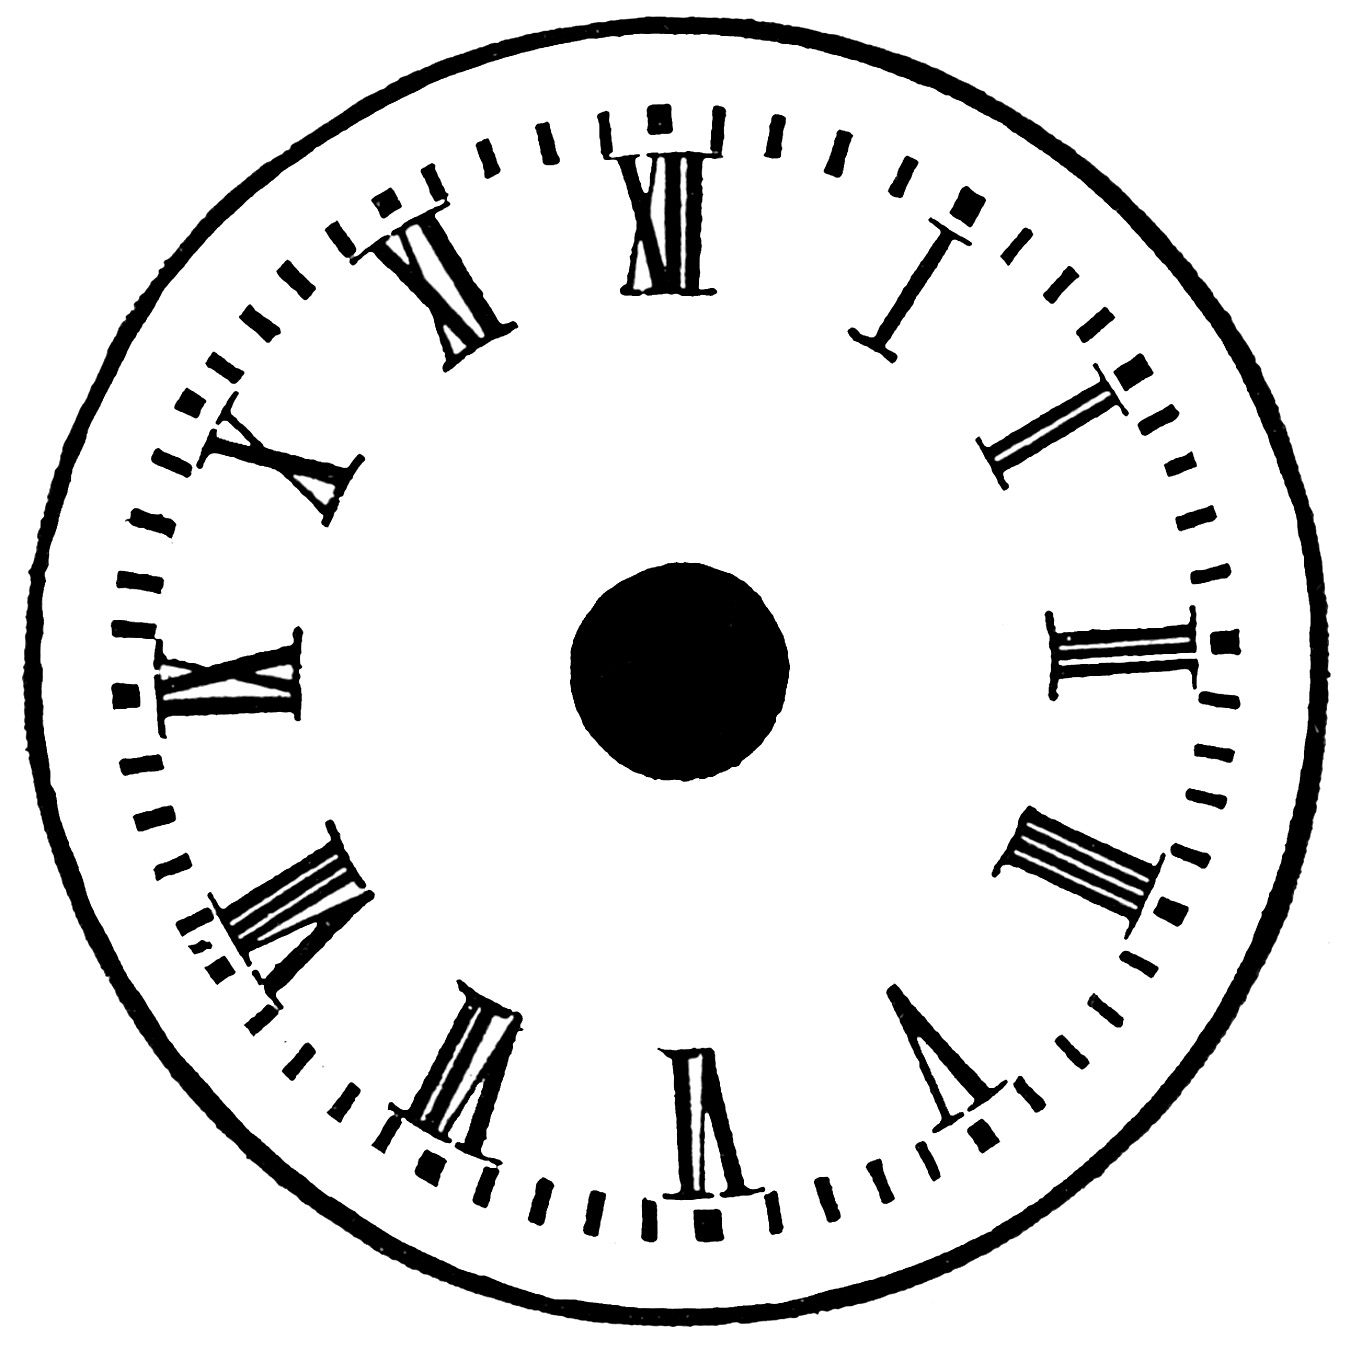 Blank Analogue Clock Faces - ClipArt Best